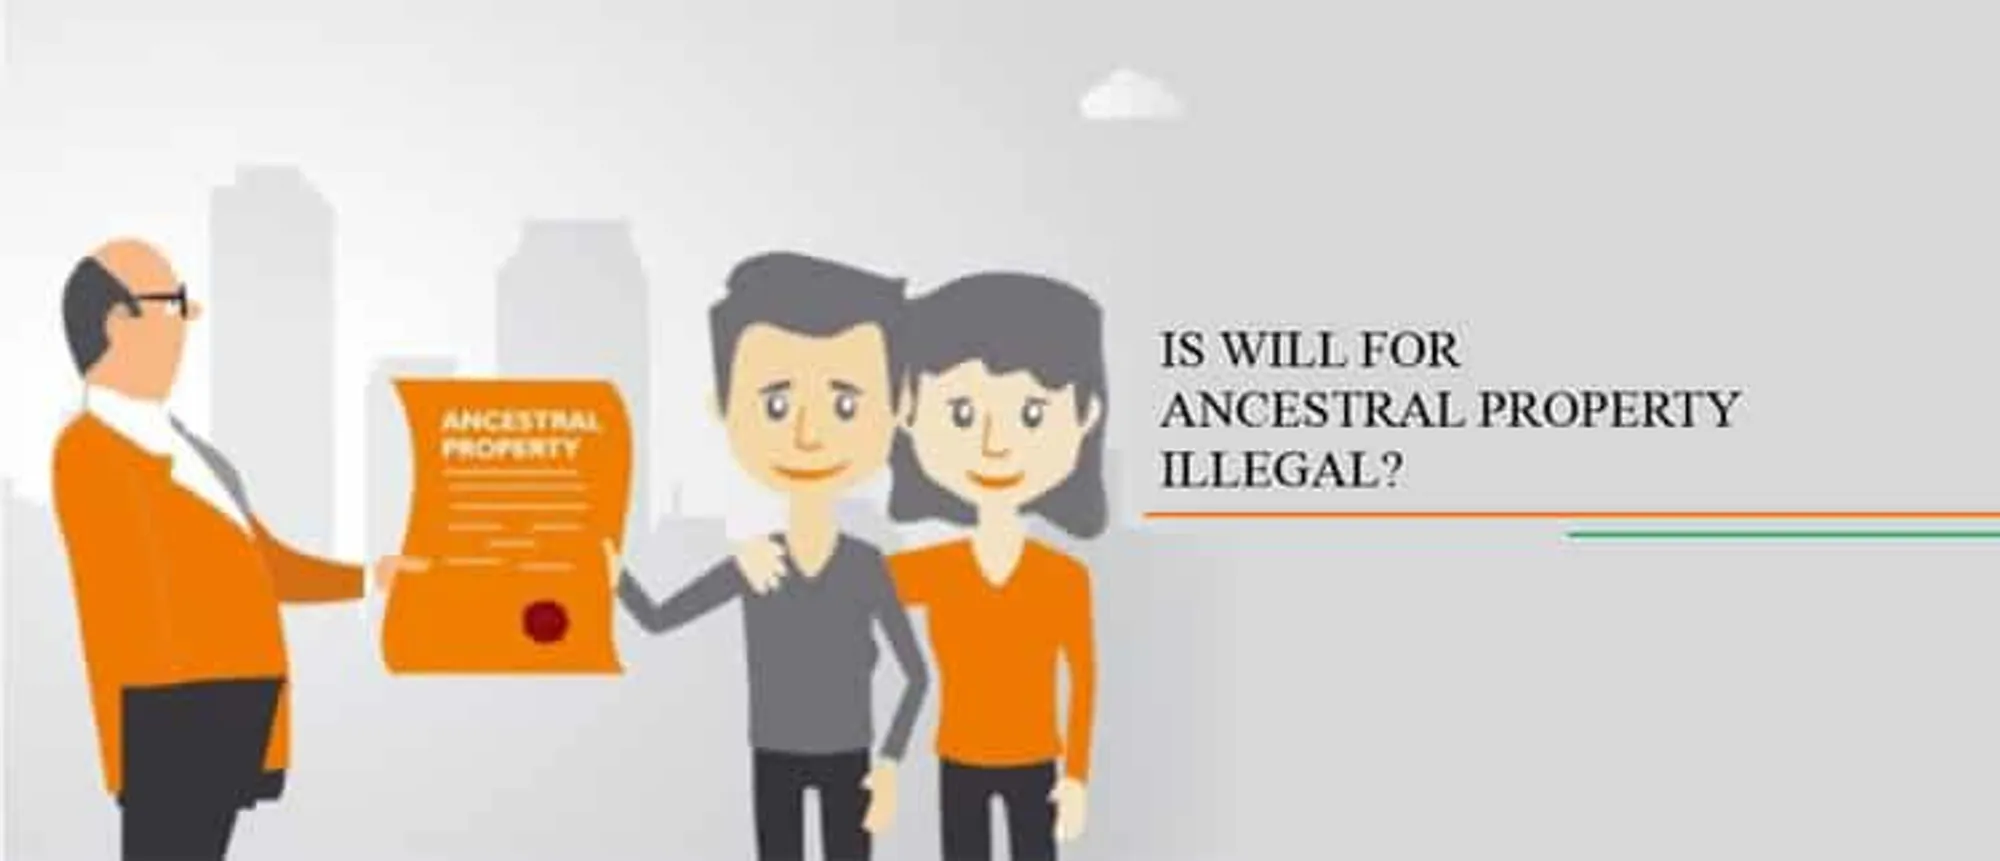 IS WILL FOR ANCESTRAL PROPERTY ILLEGAL?